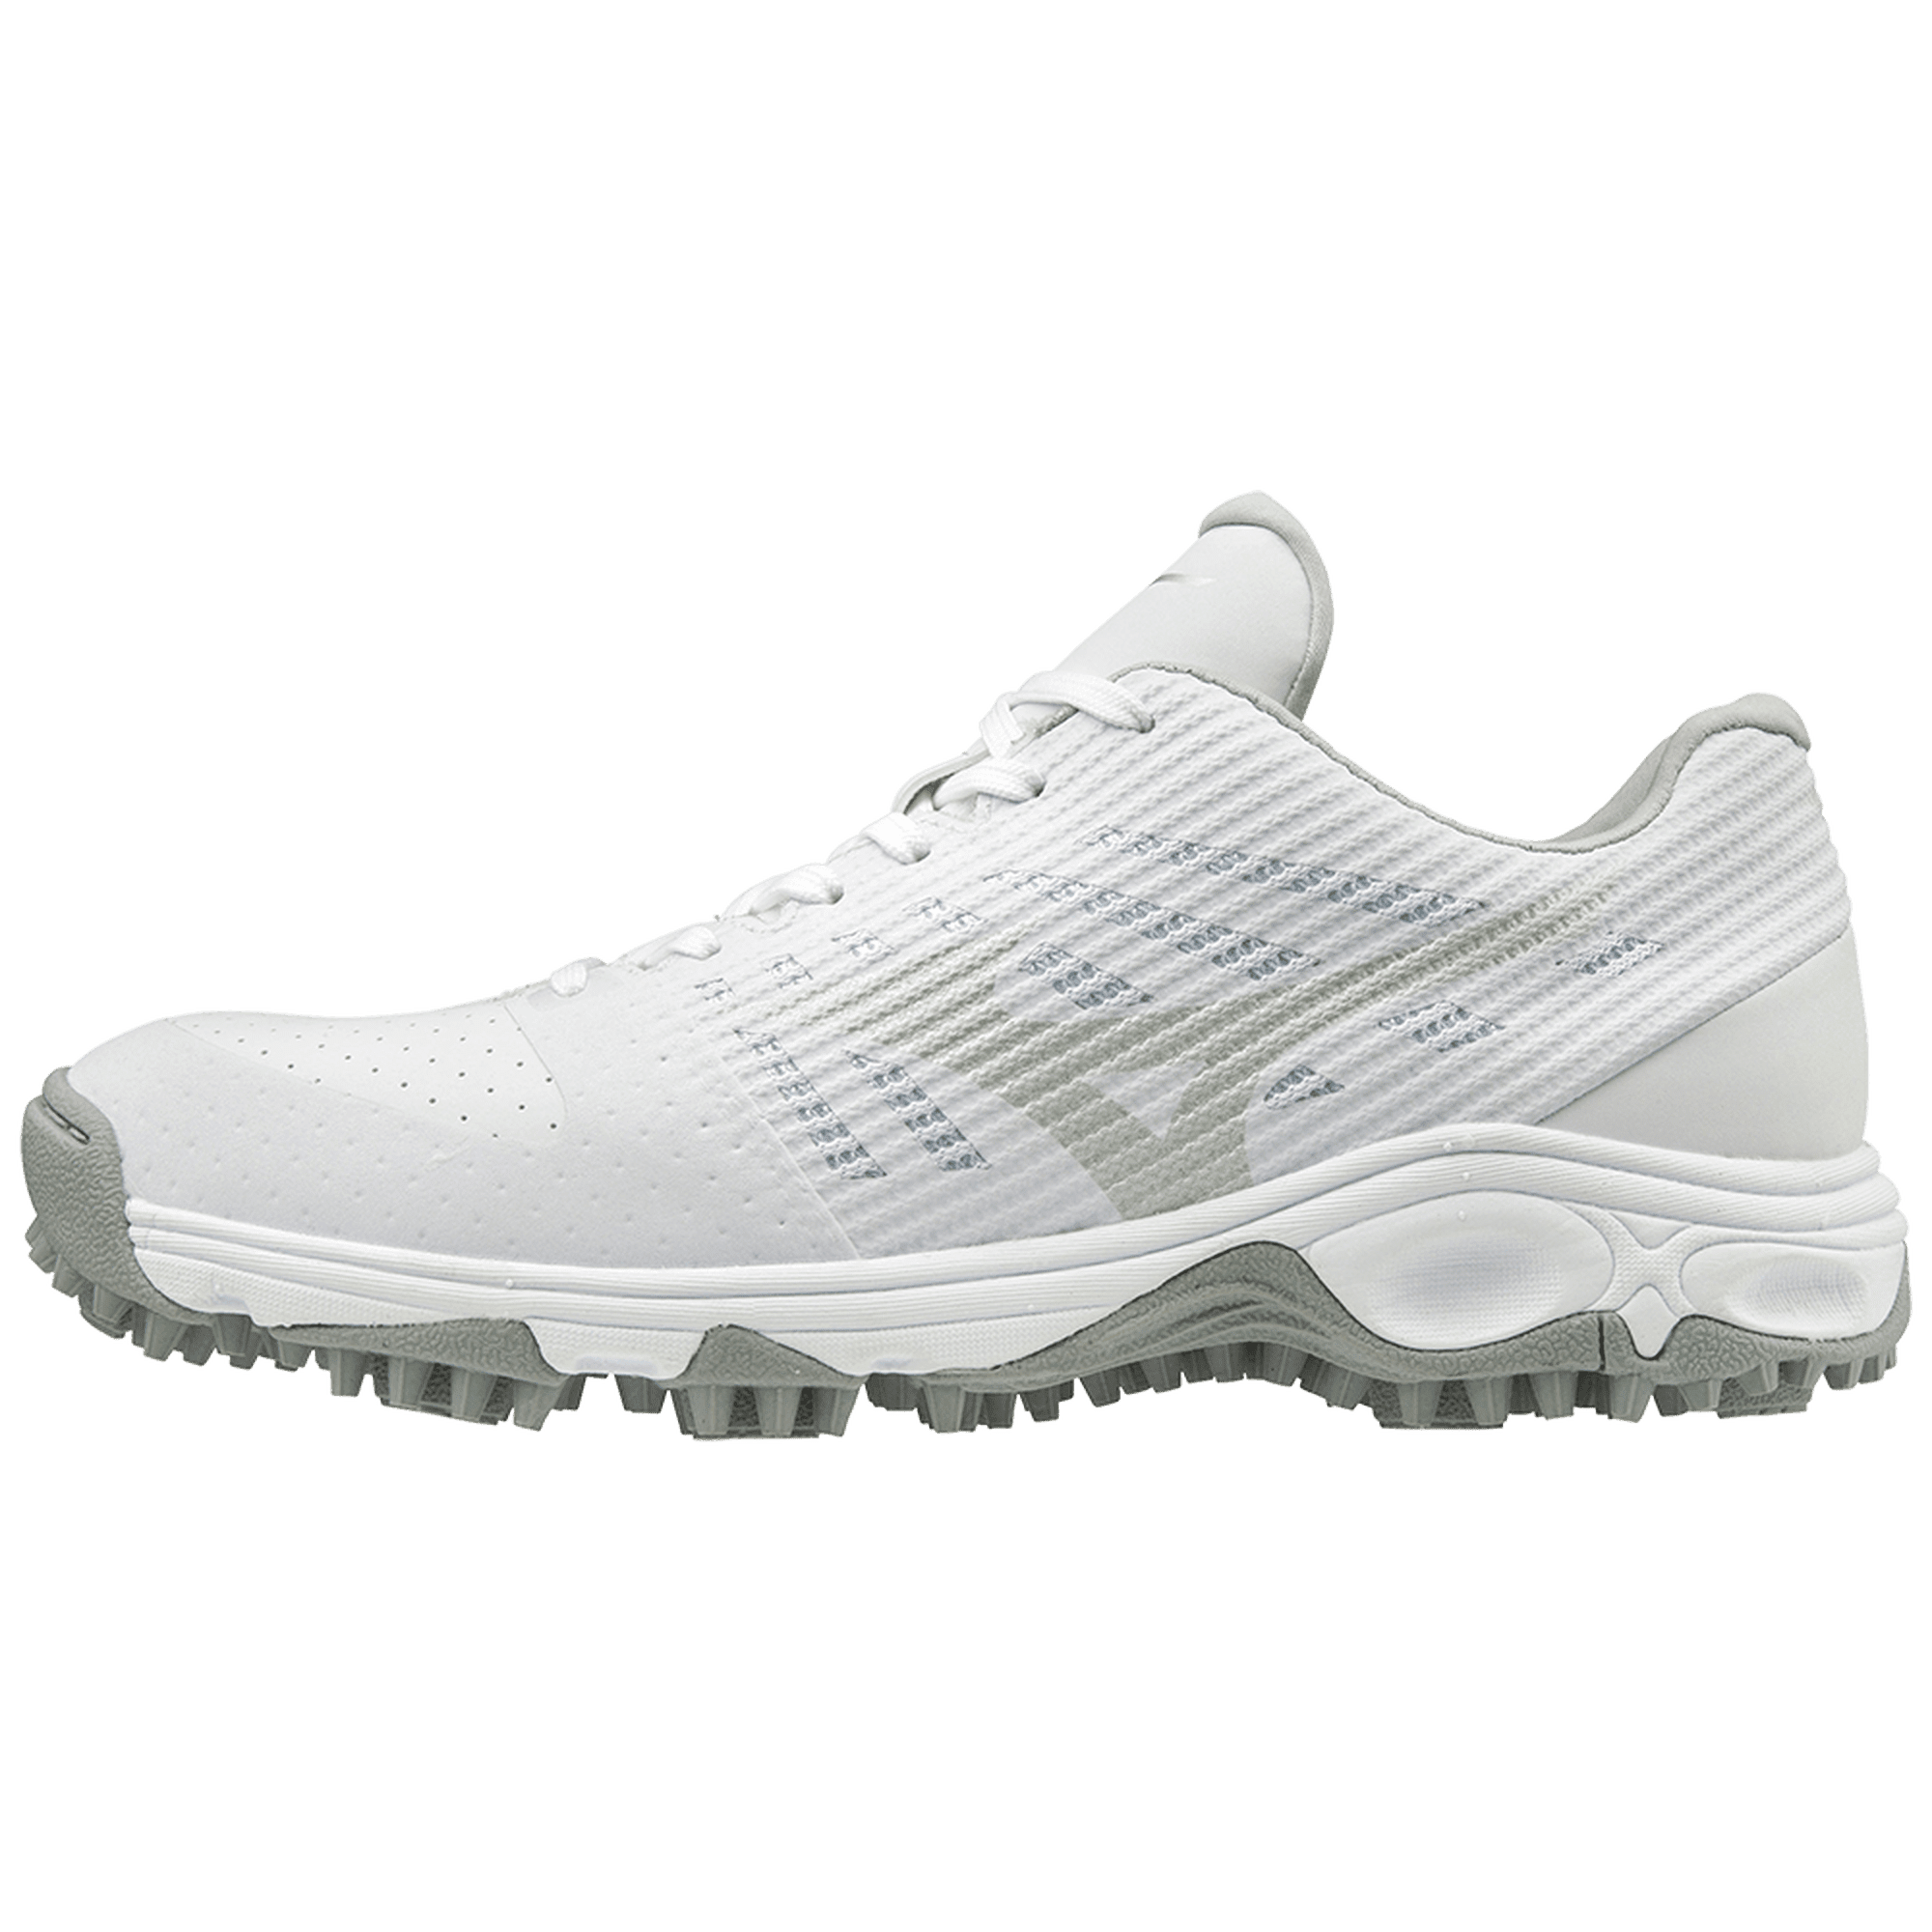 men's slow pitch softball turf shoes